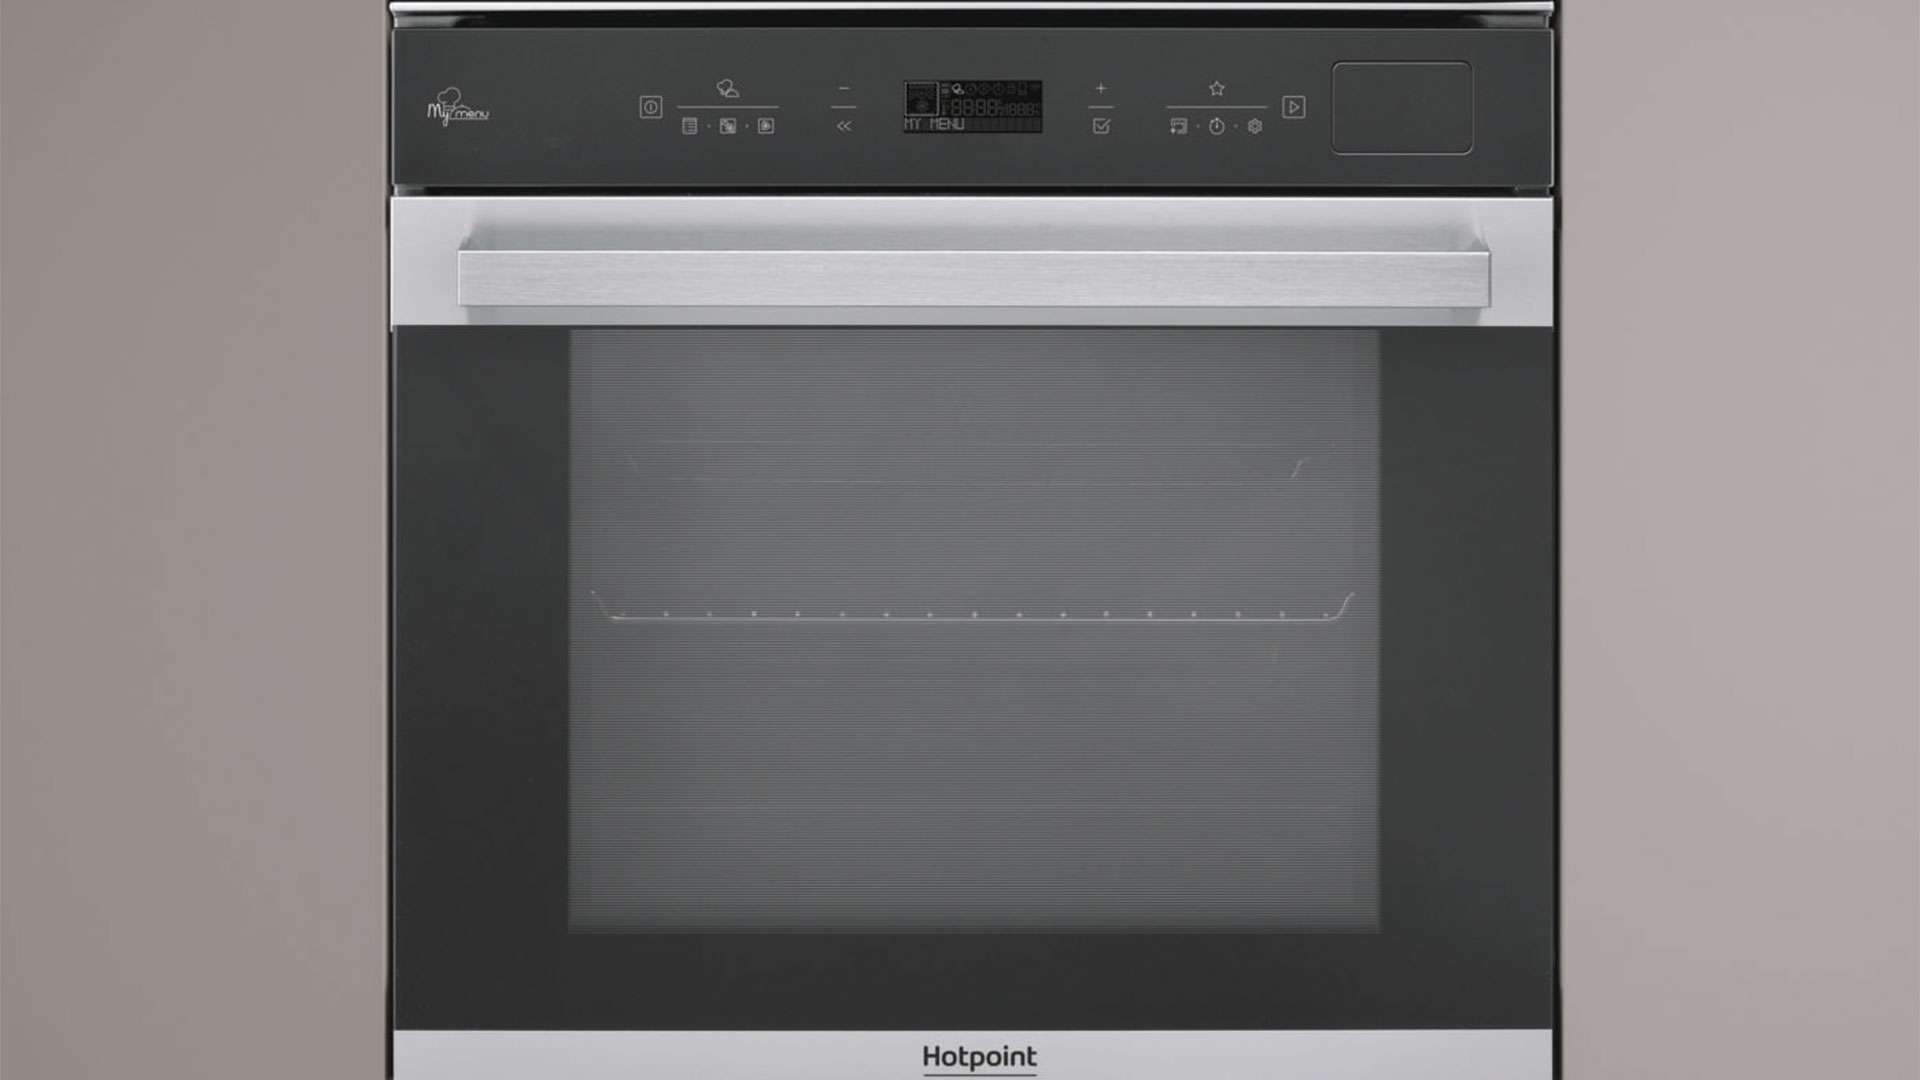 Light and fragrant cooking styles with the Active Steam75 oven by Hotpoint